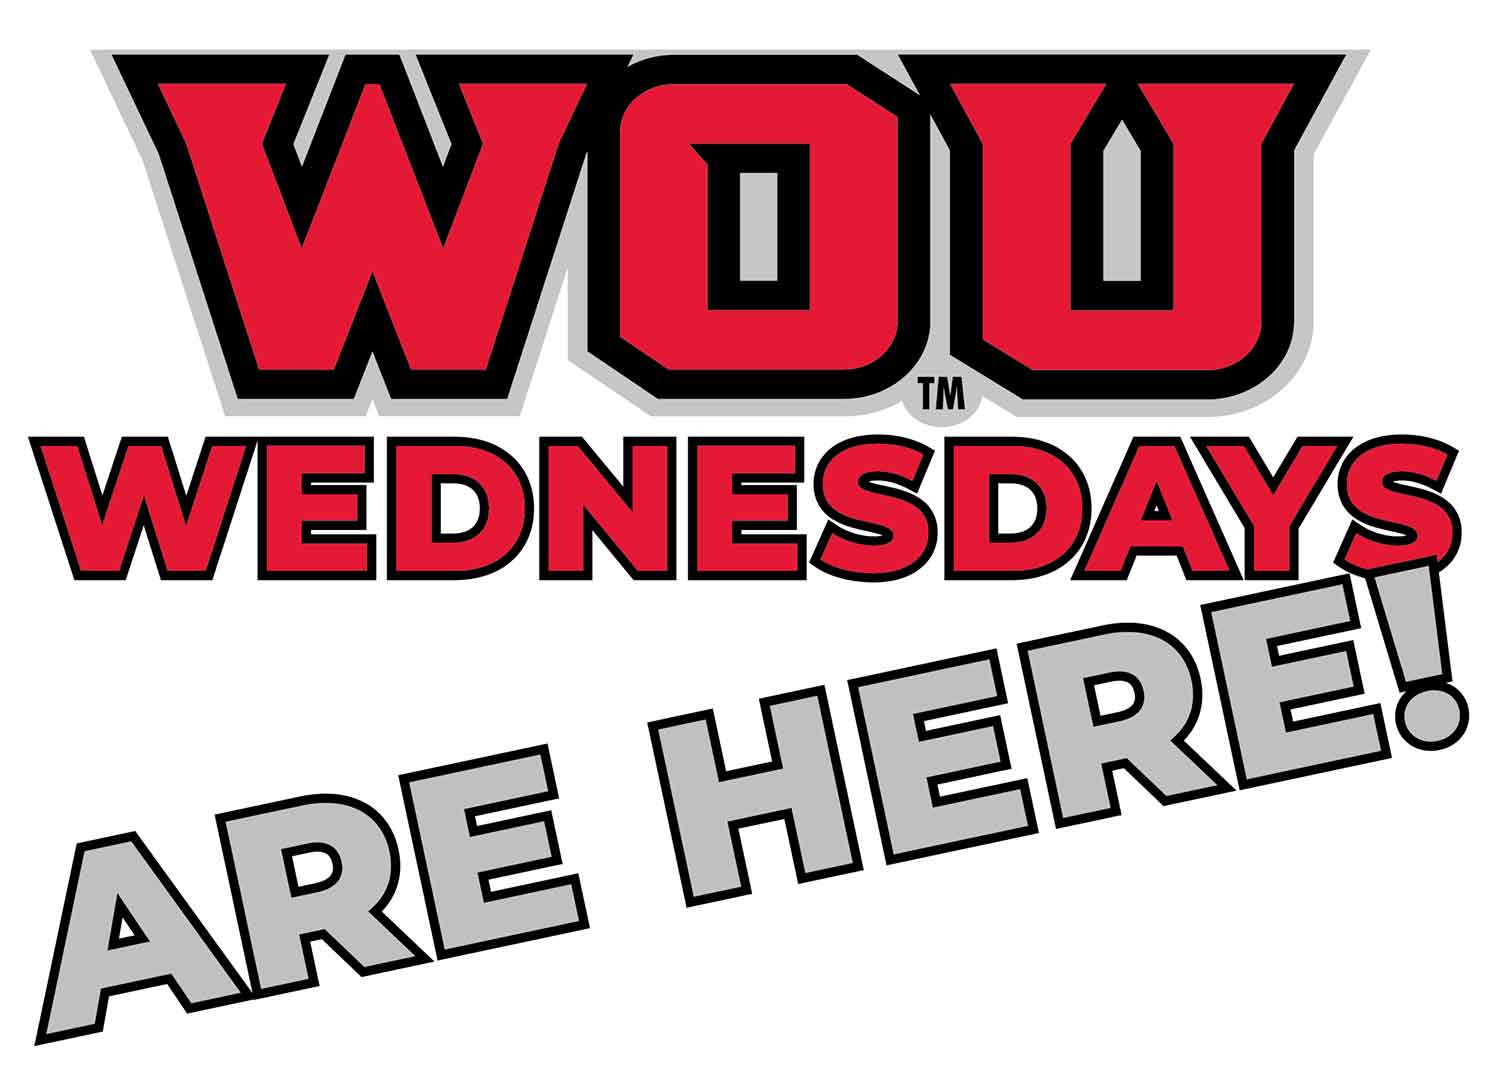 WOU Wednesdays are here!